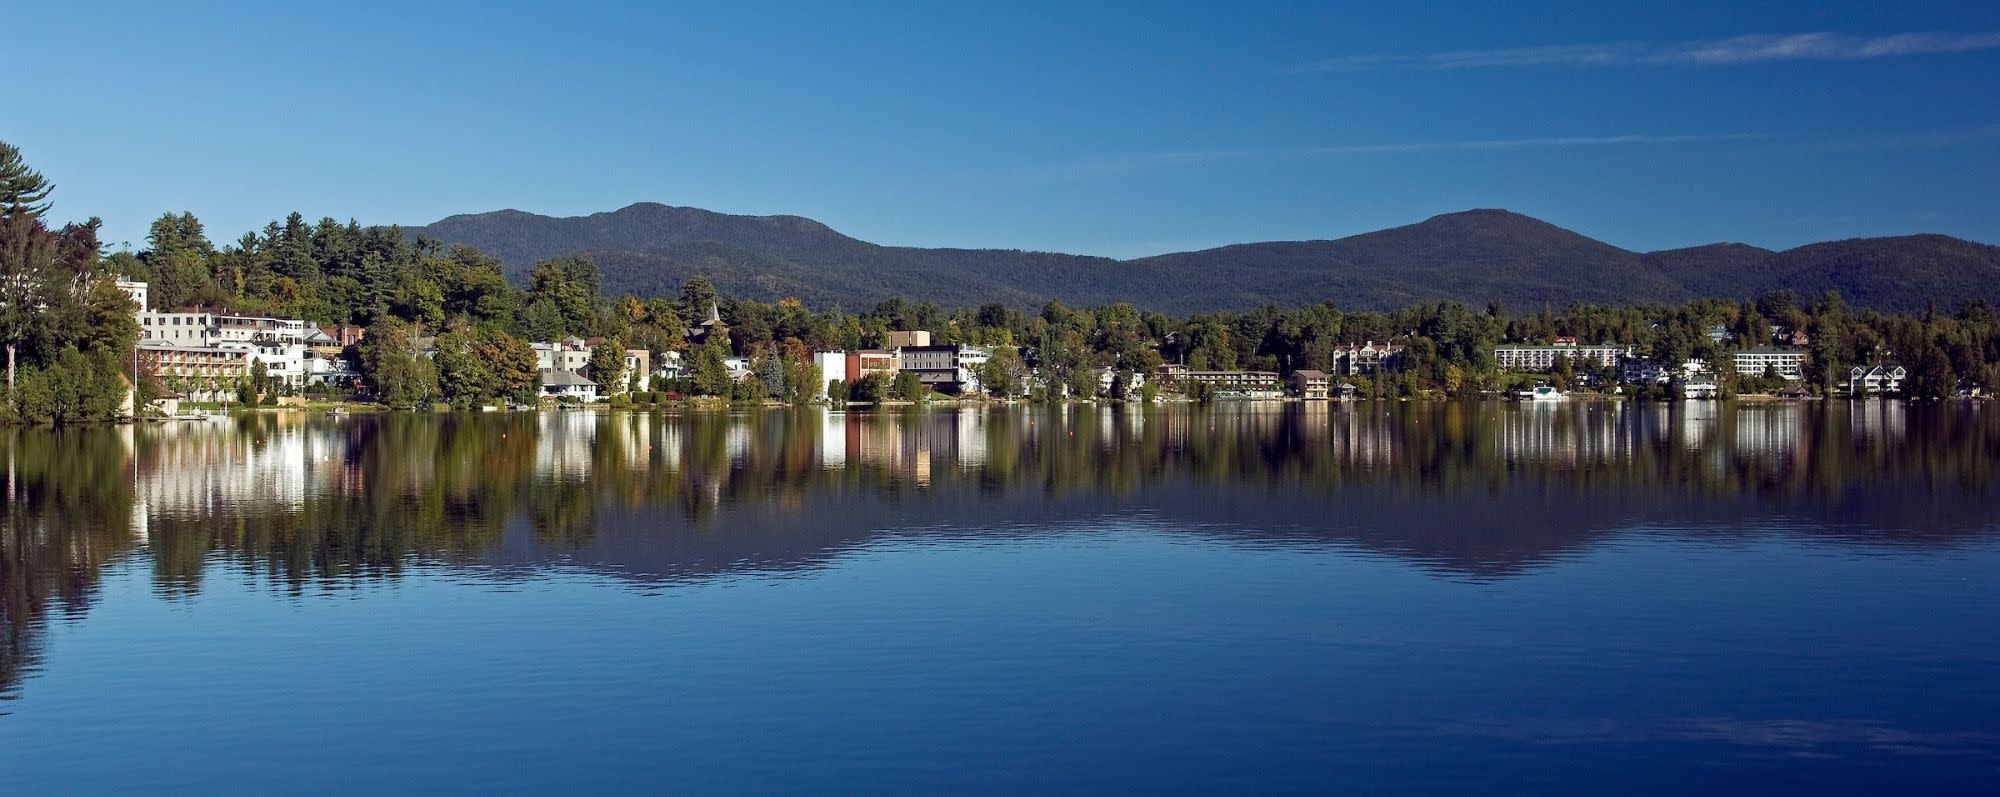 Lake Placid City Guide Hiking Restaurants Things To Do